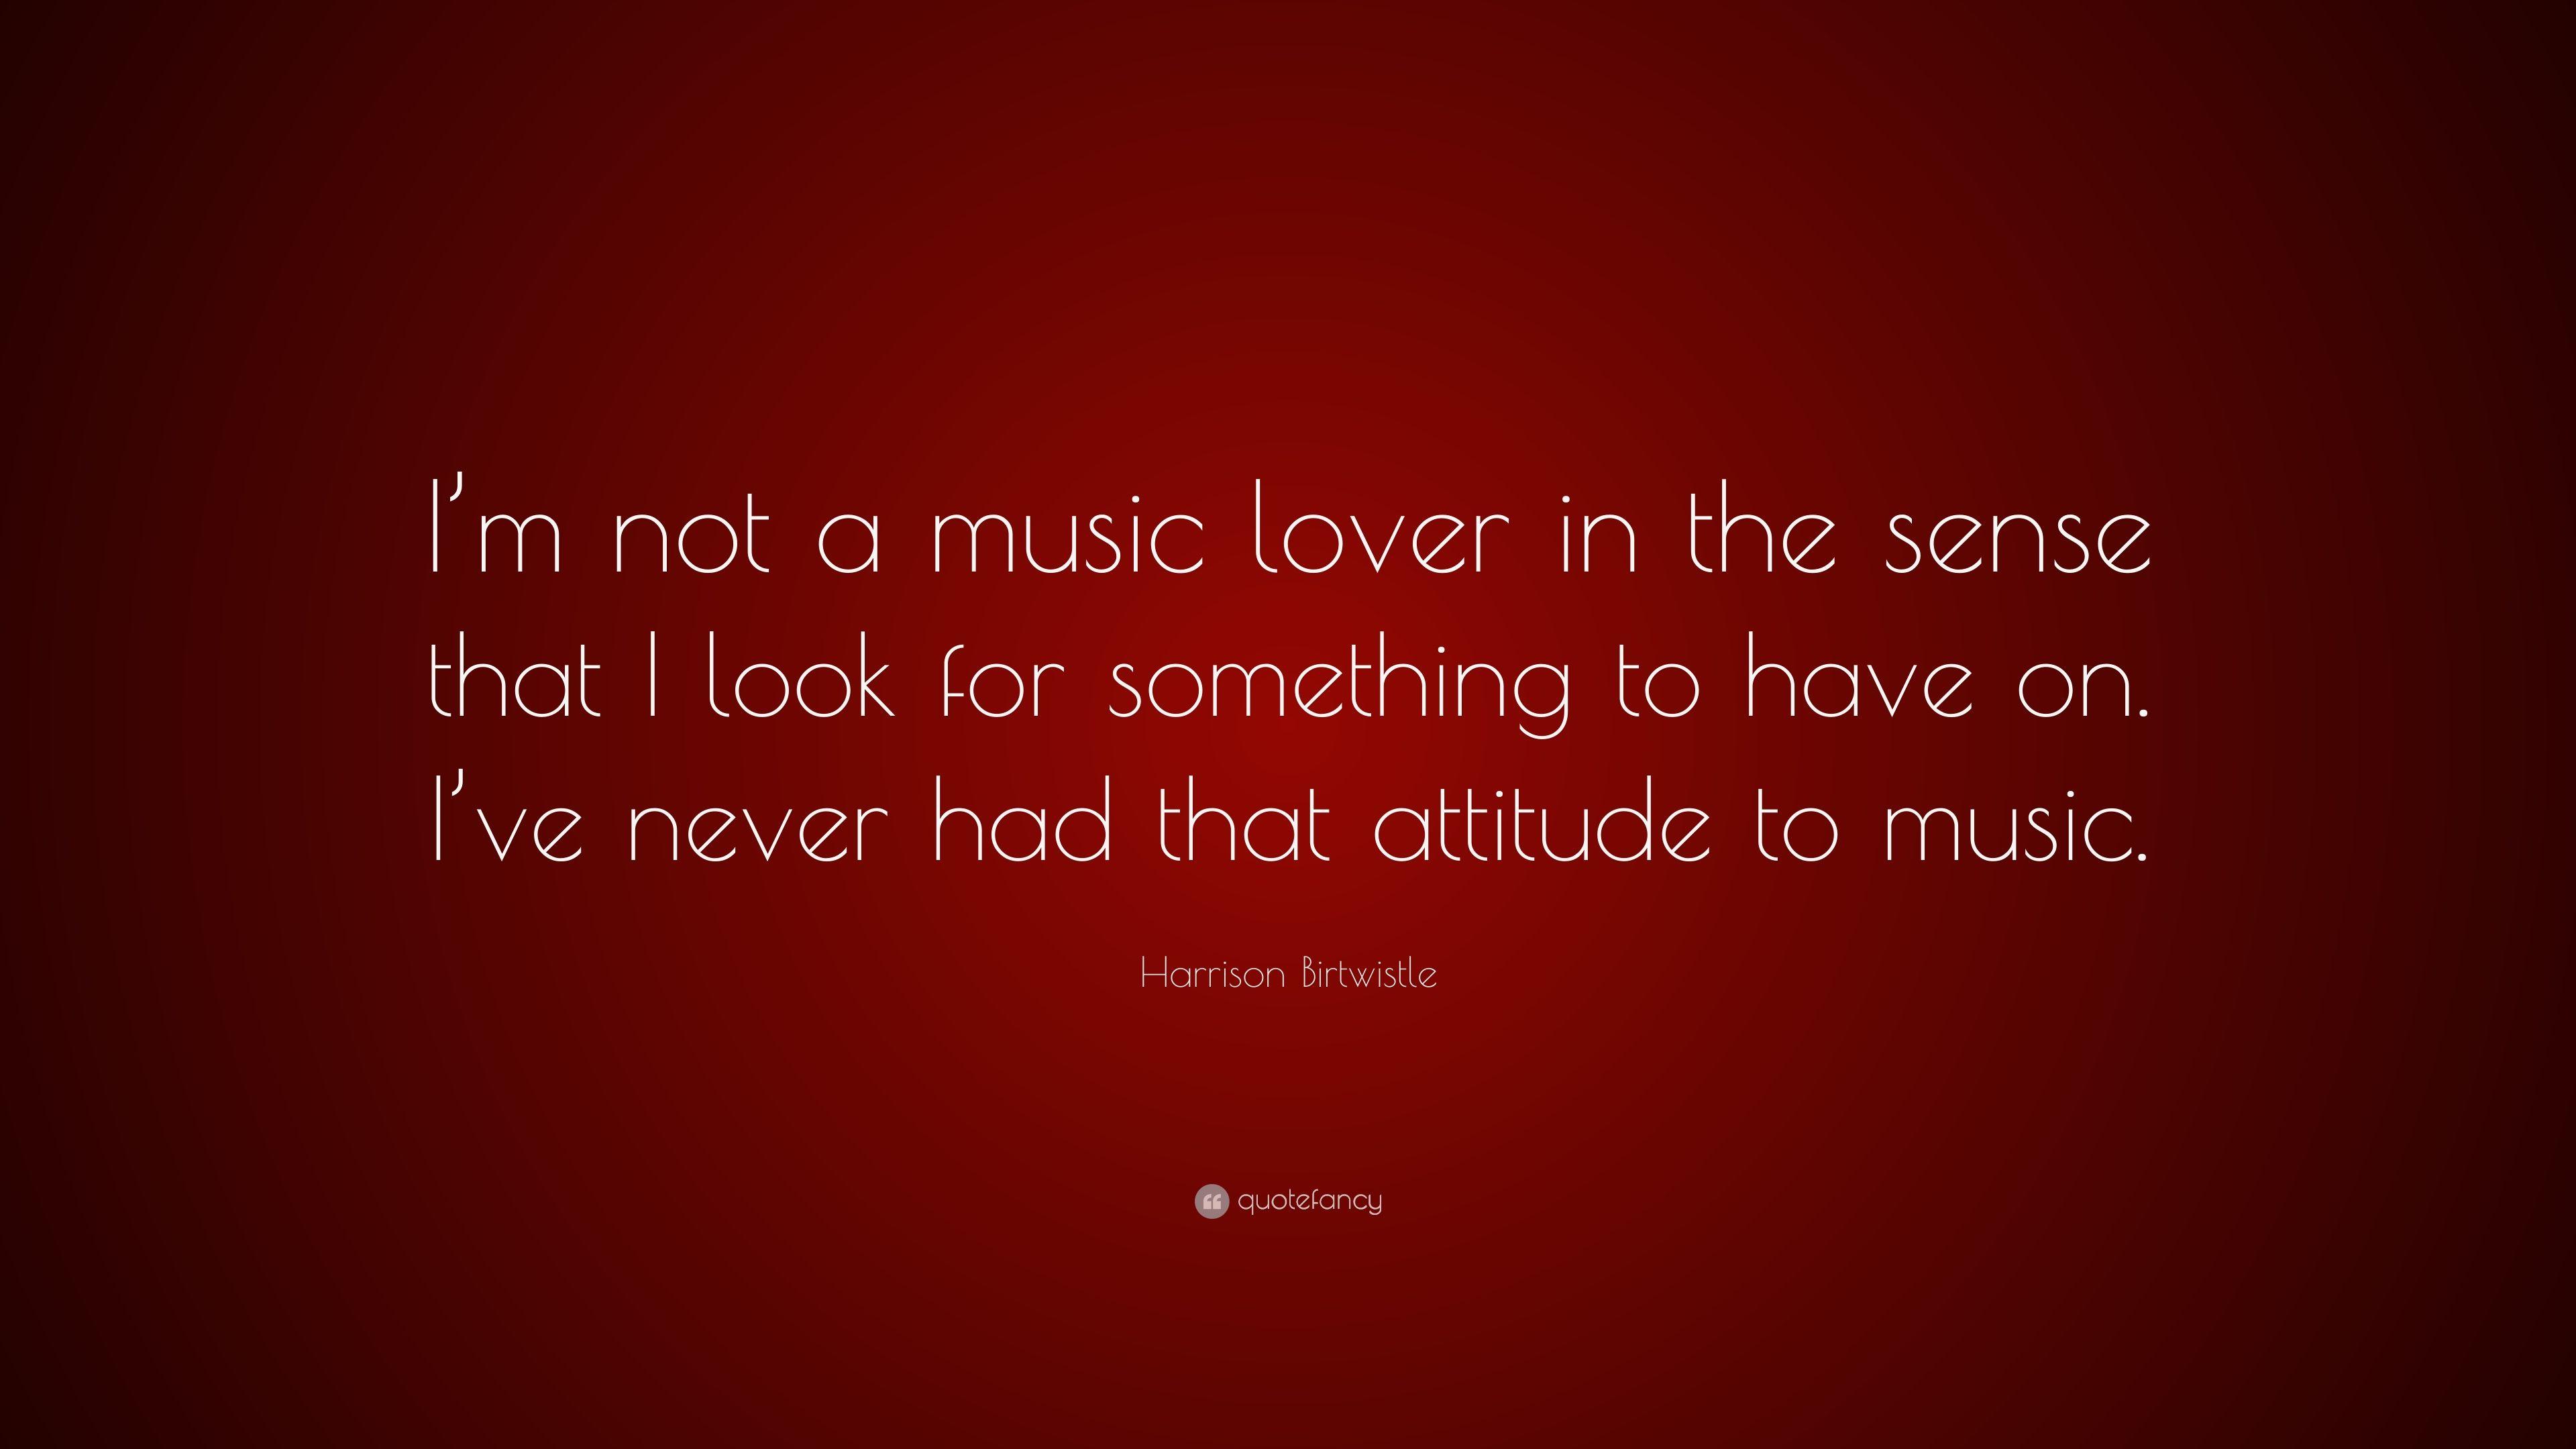 Harrison Birtwistle Quote: “I'm not a music lover in the sense